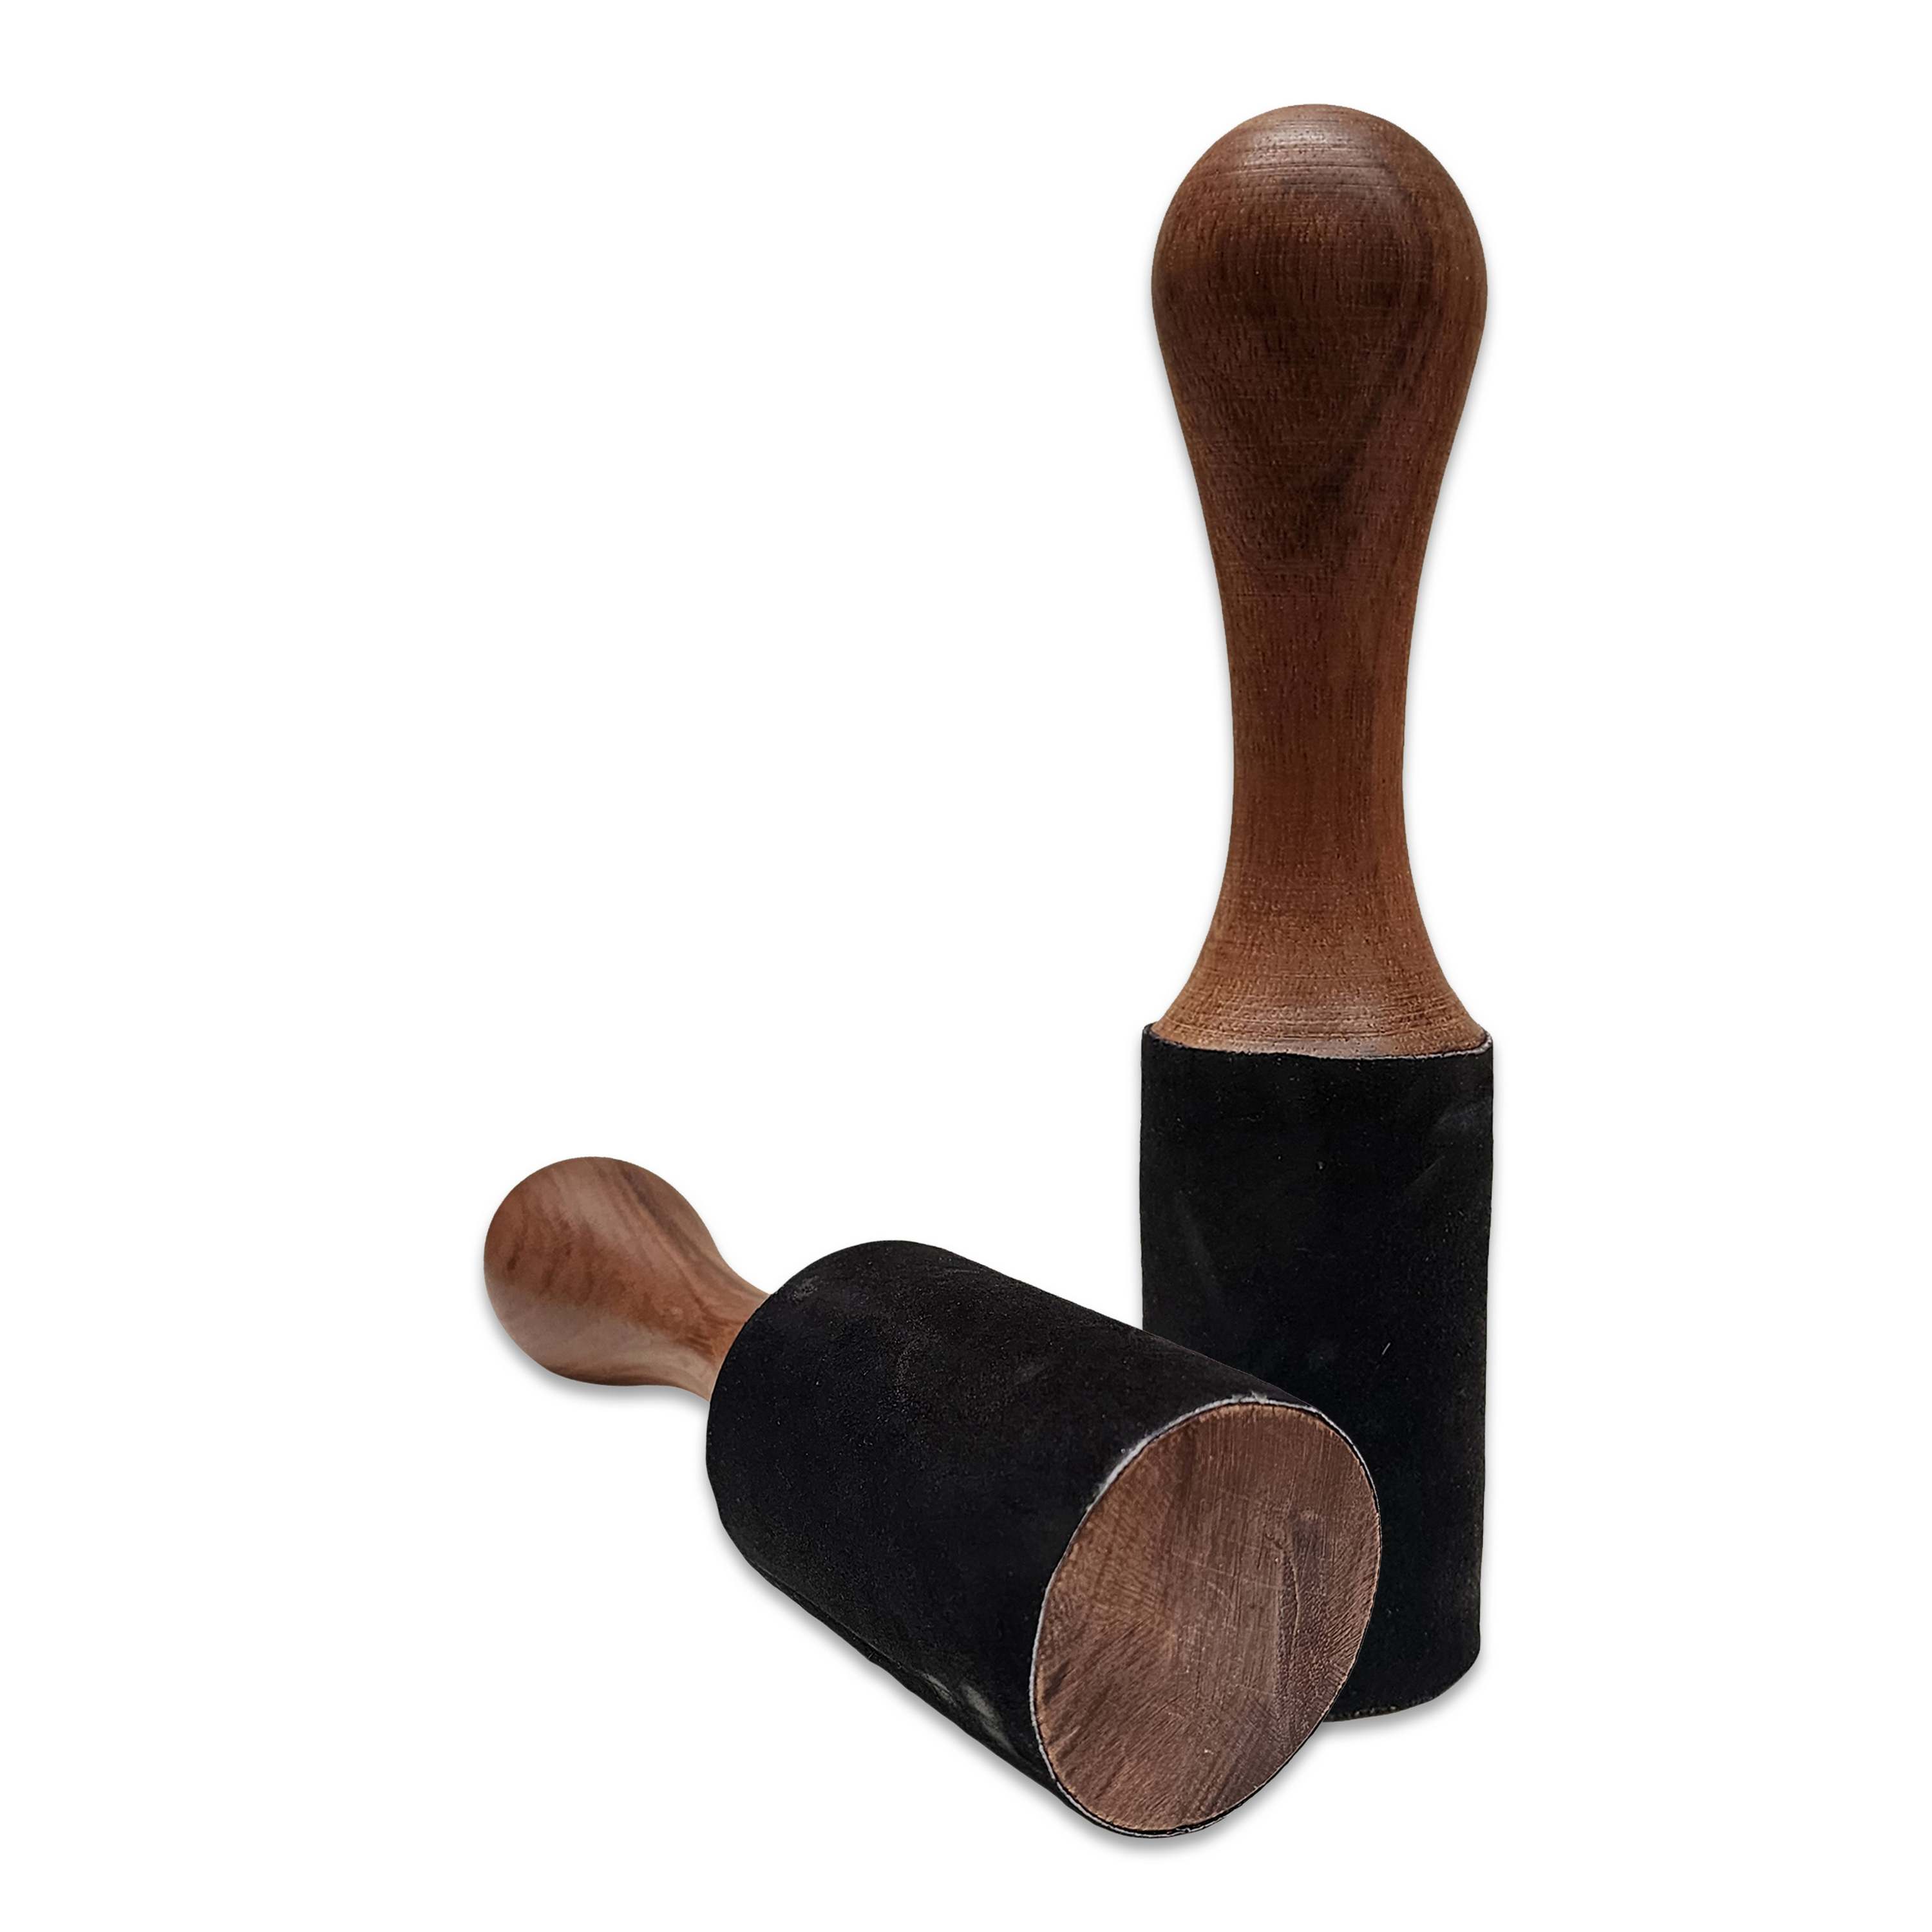 Singing Bowl Accessories, Wooden And Leather, Stroking And Playing Mallet, Medium